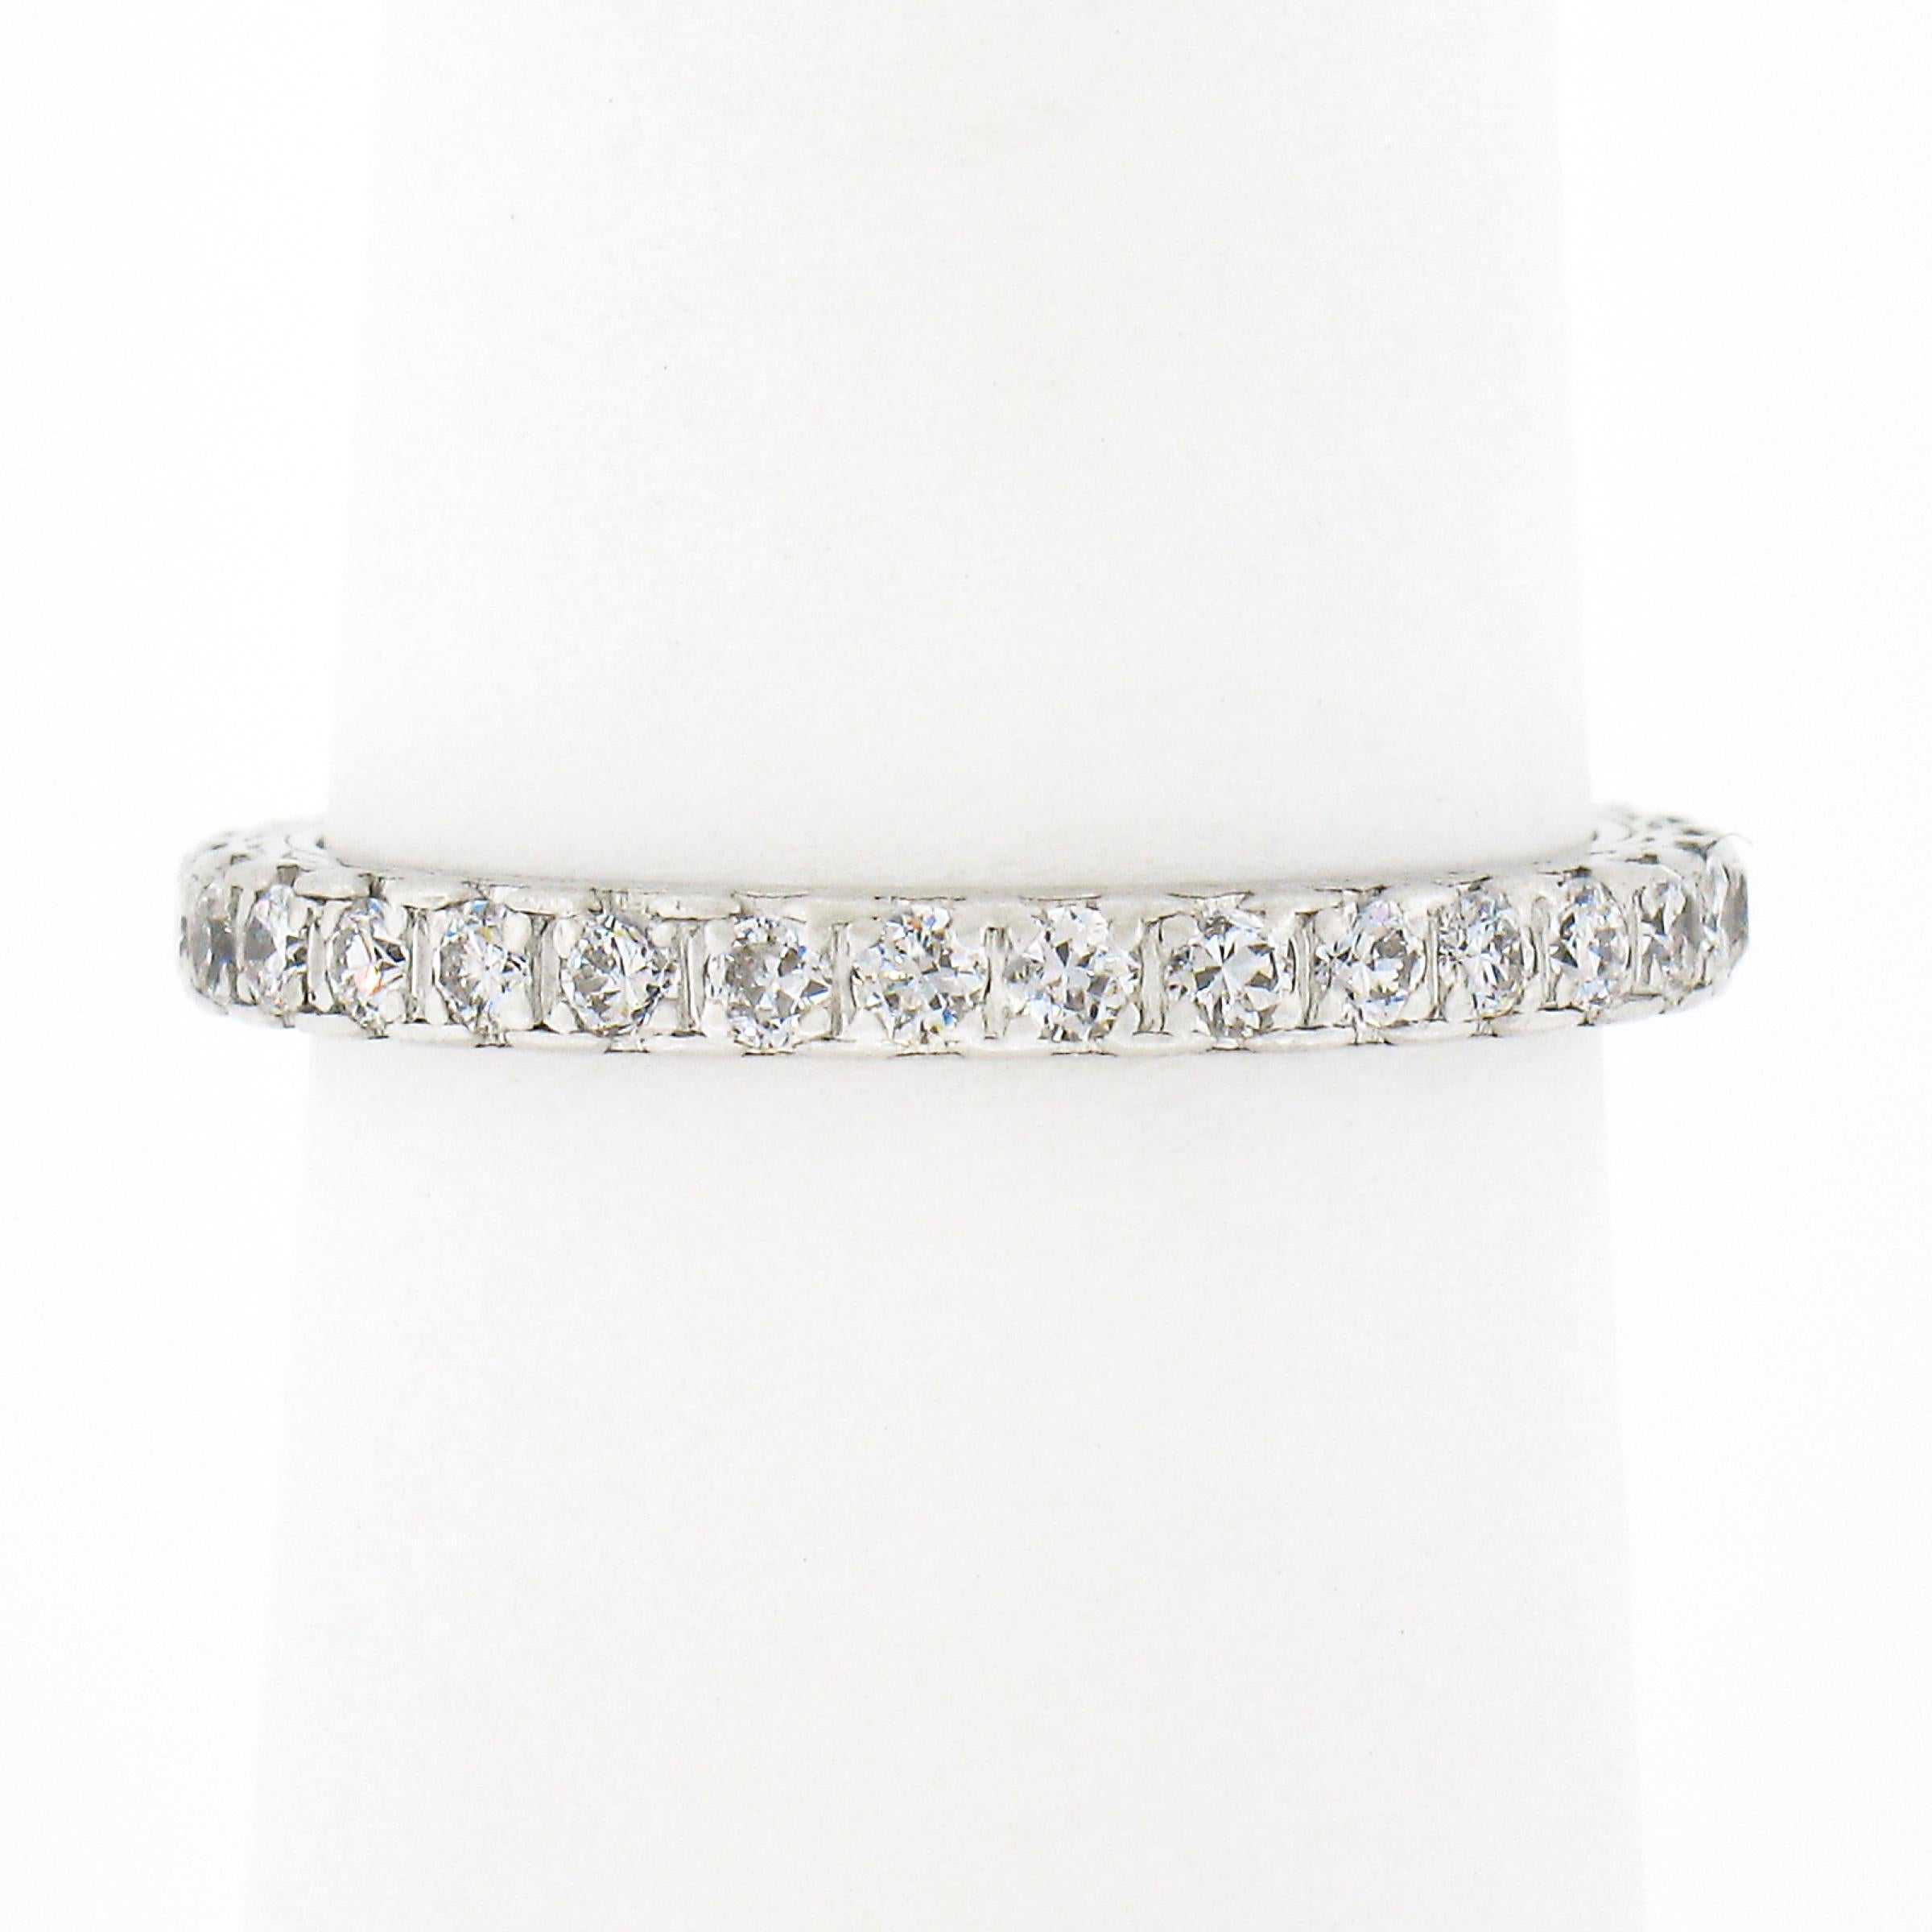 This gorgeous antique diamond eternity band ring was crafted from solid .900 platinum during the 1930's. It features a simple design that carries VERY fine and fiery old transitional cut diamonds that are neatly pave set all the way around the band.